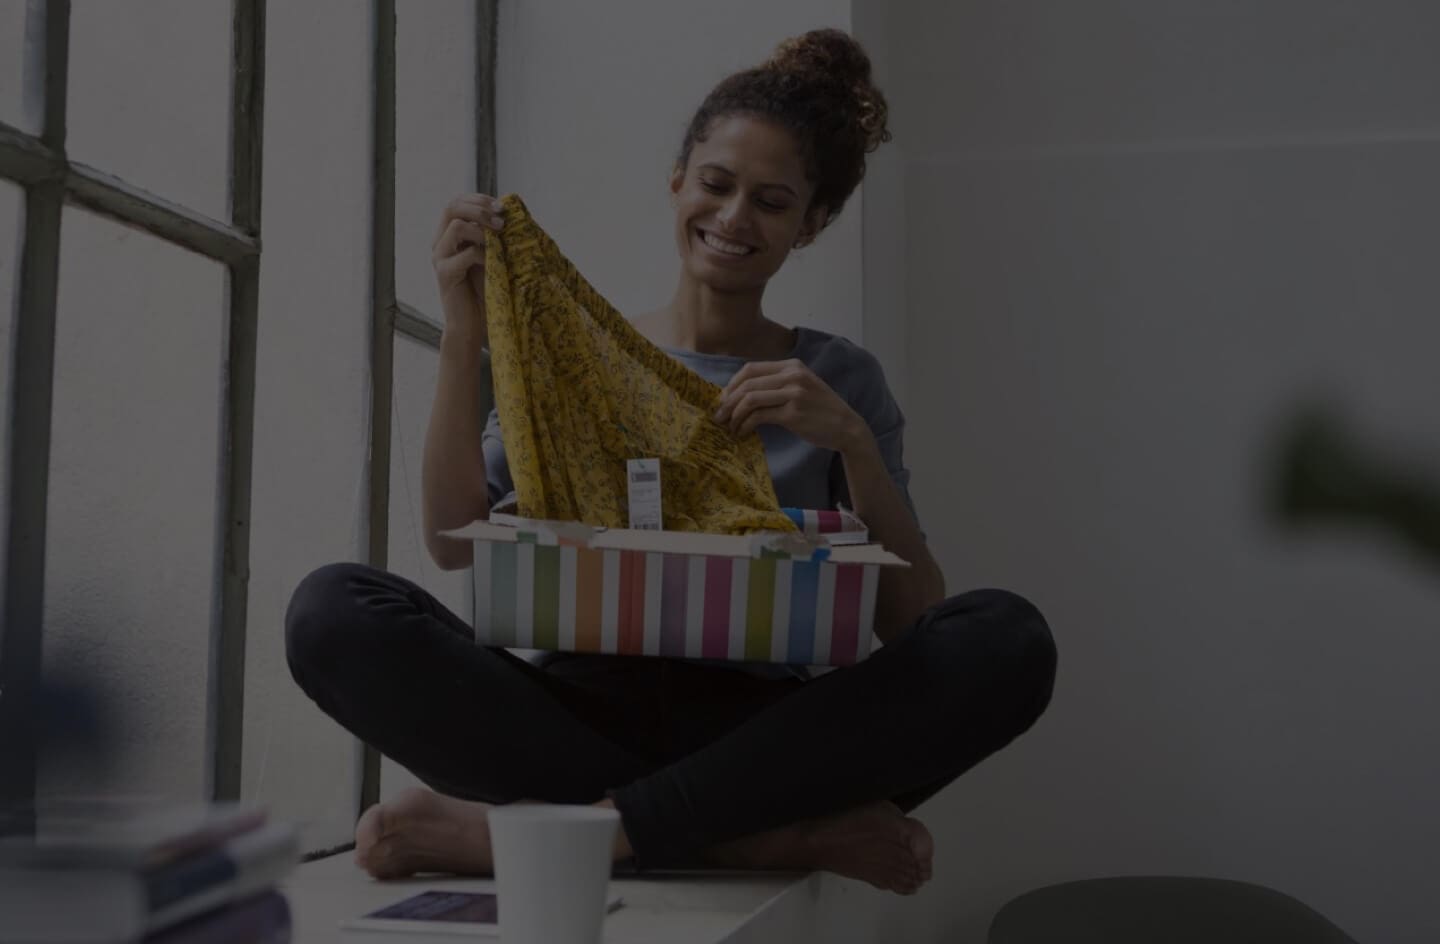 Image of woman opening up package